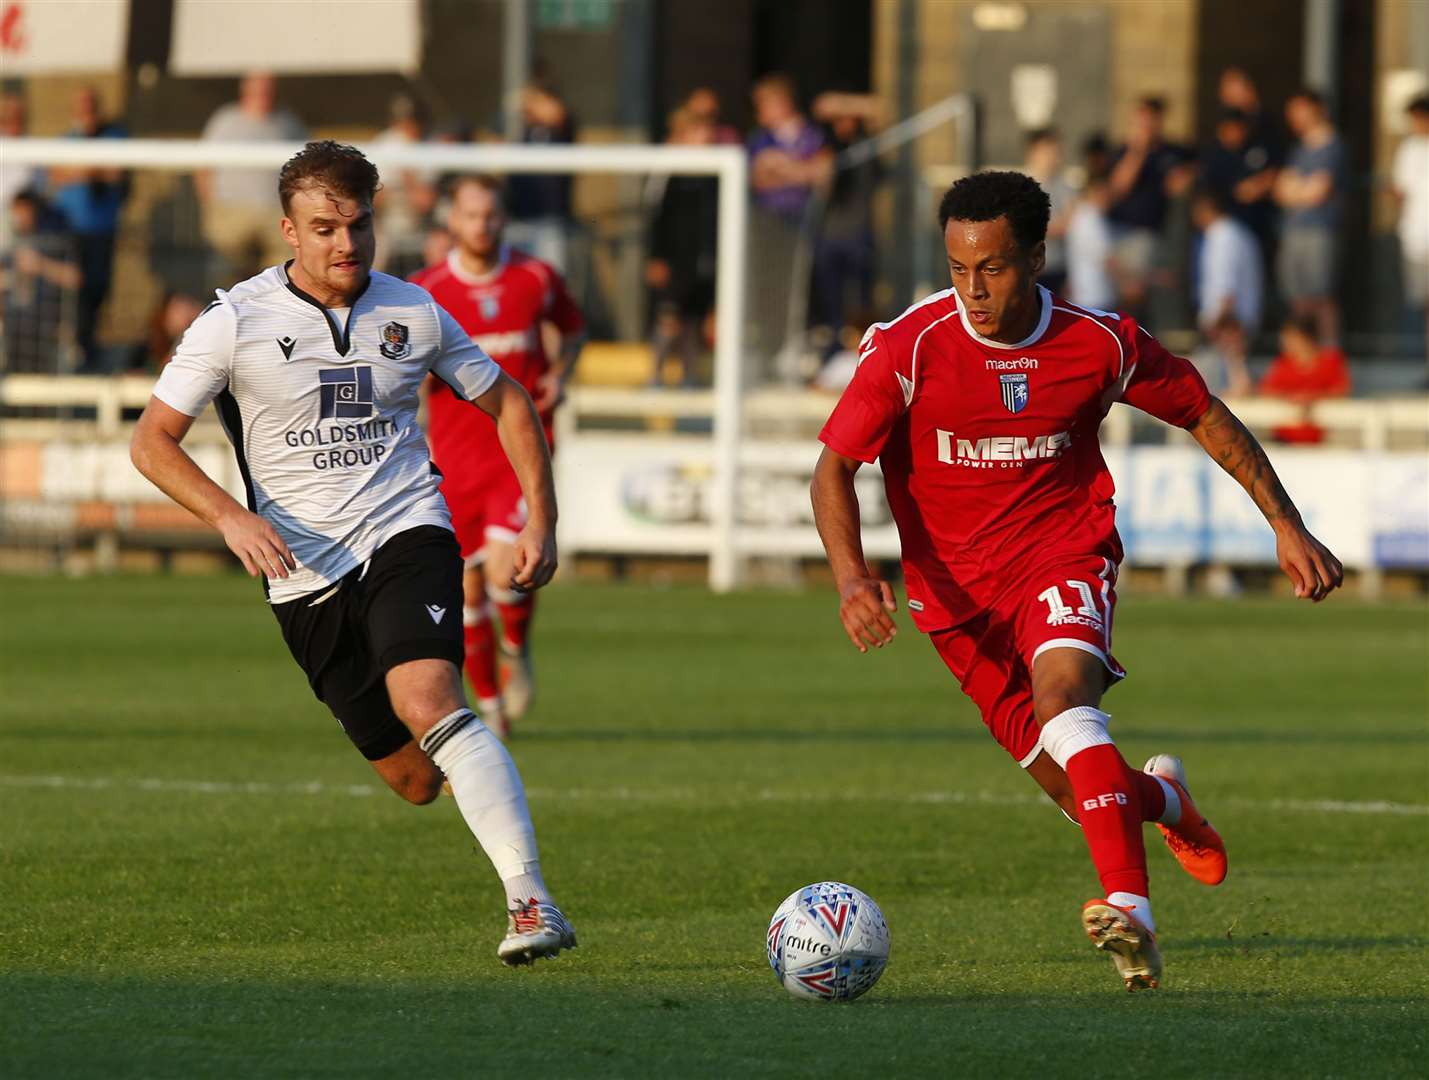 Sam Blackman (left) was injured playing for Dartford against Bromley Picture: Andy Jones